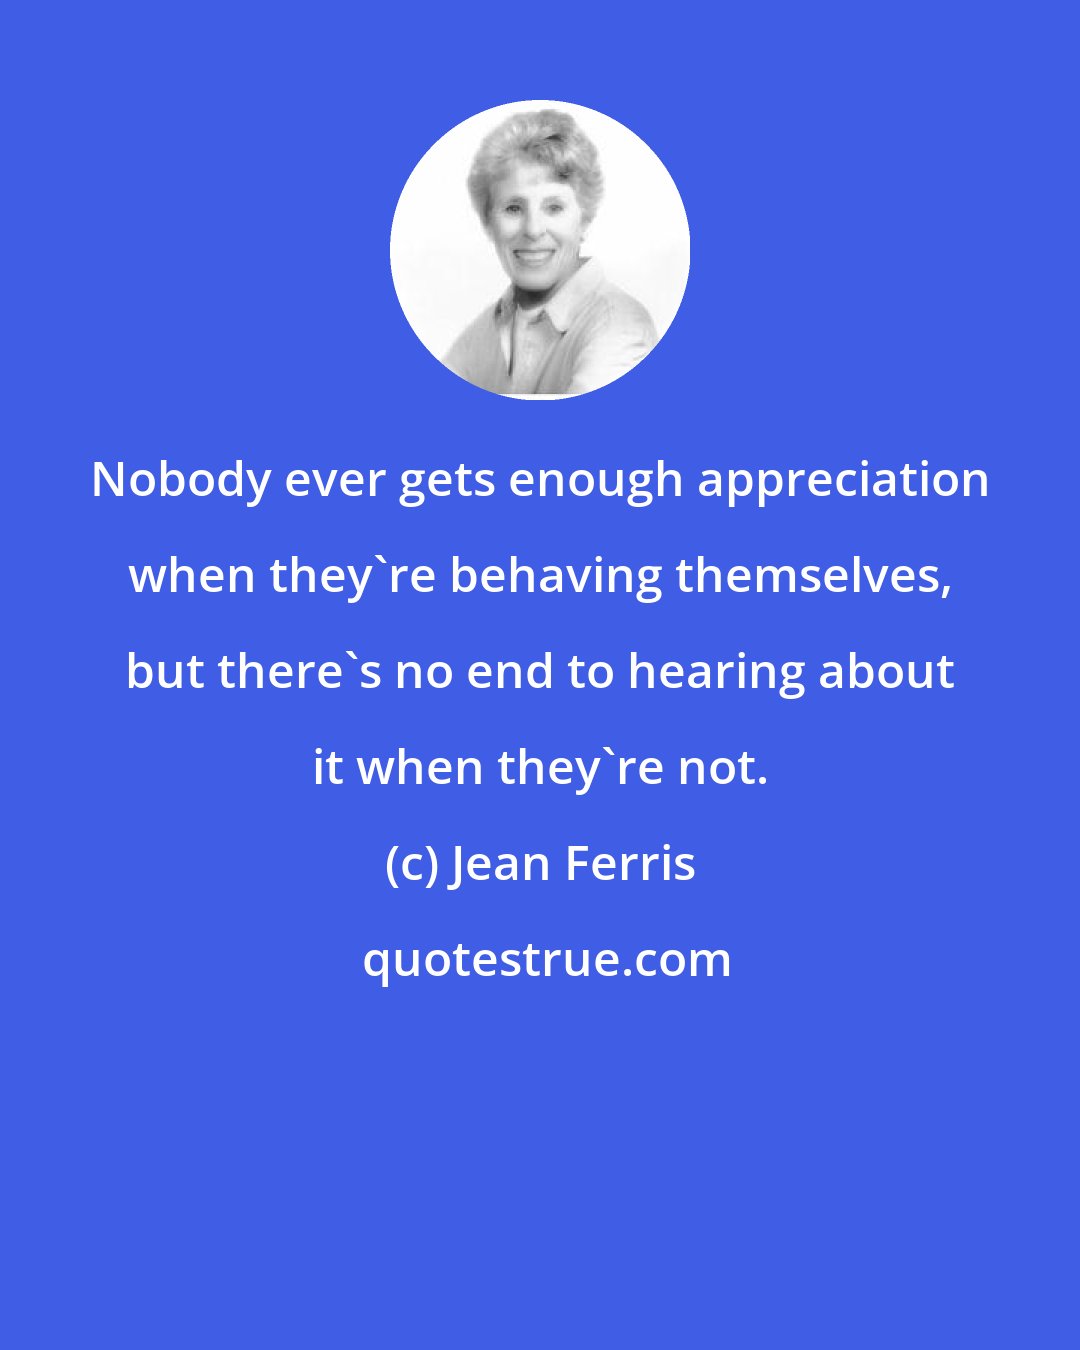 Jean Ferris: Nobody ever gets enough appreciation when they're behaving themselves, but there's no end to hearing about it when they're not.